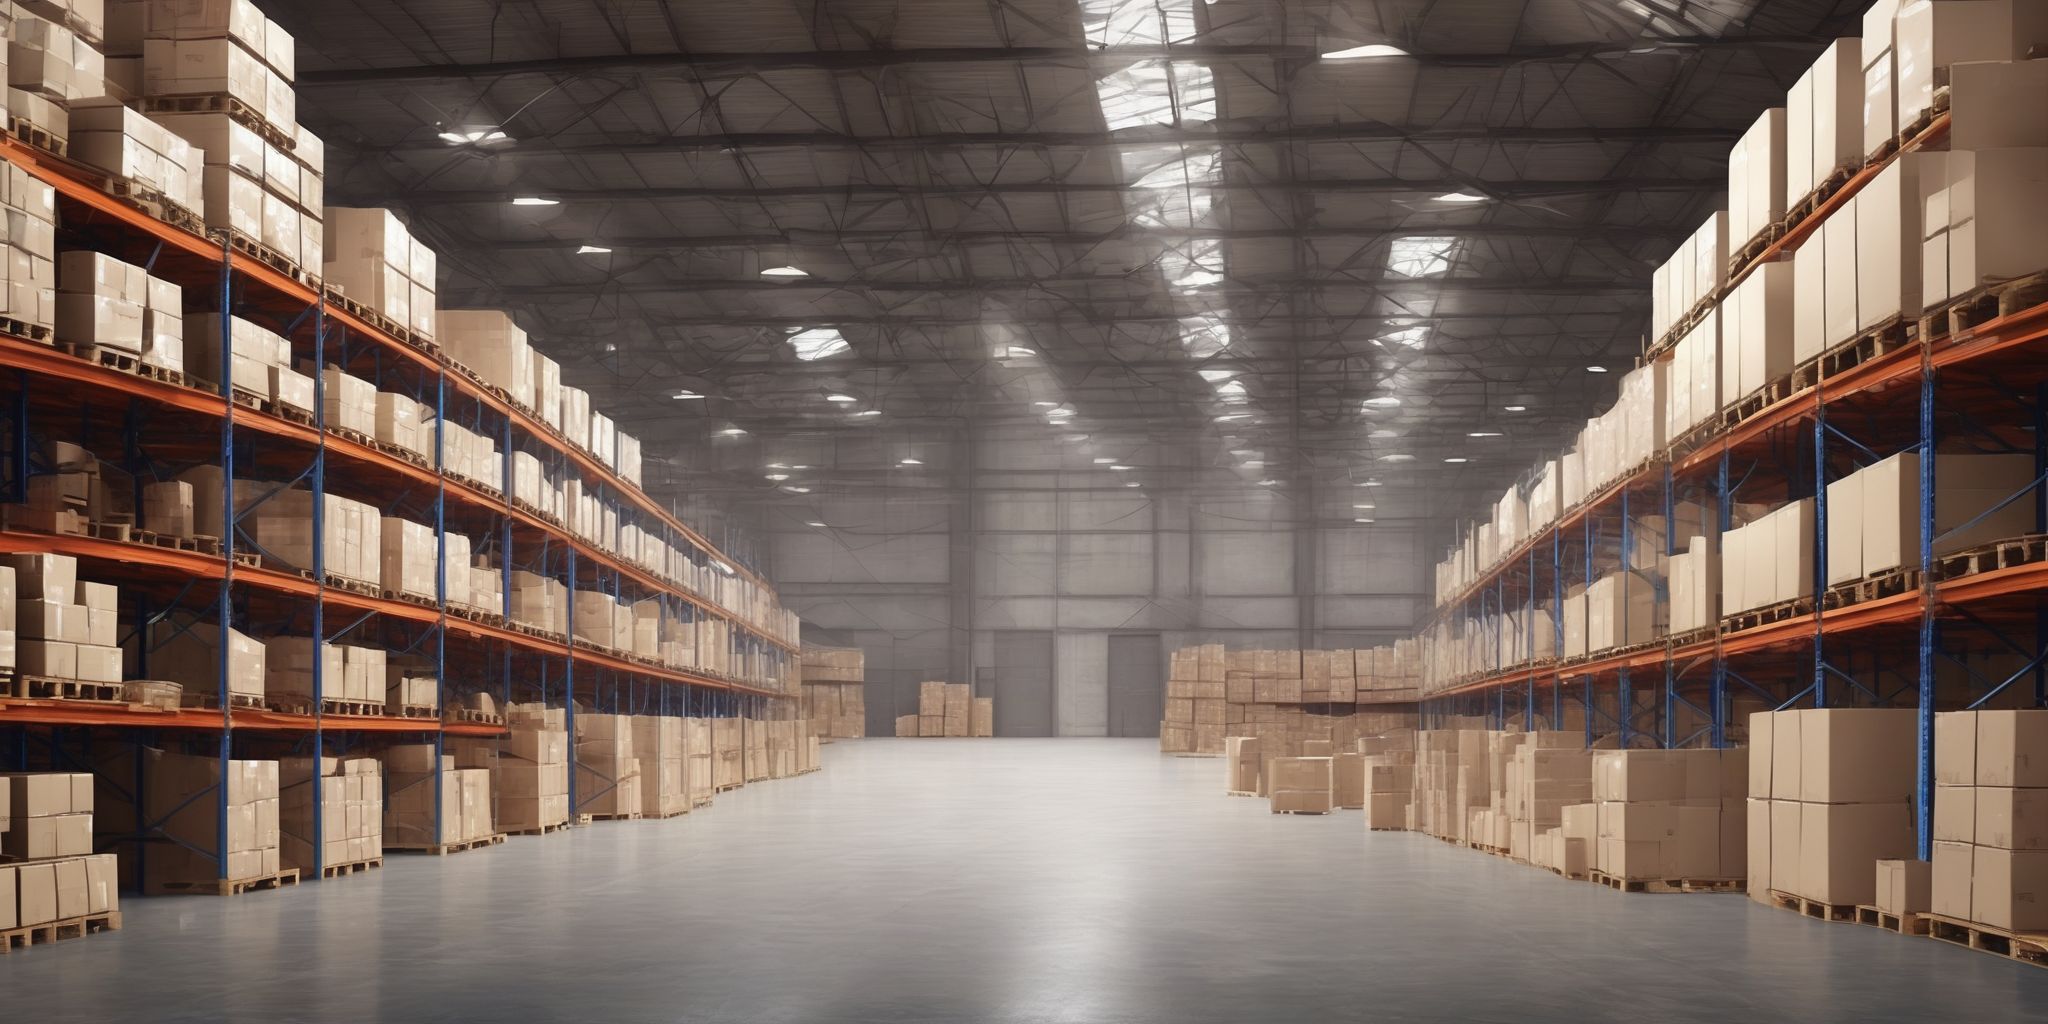 Warehouse  in realistic, photographic style